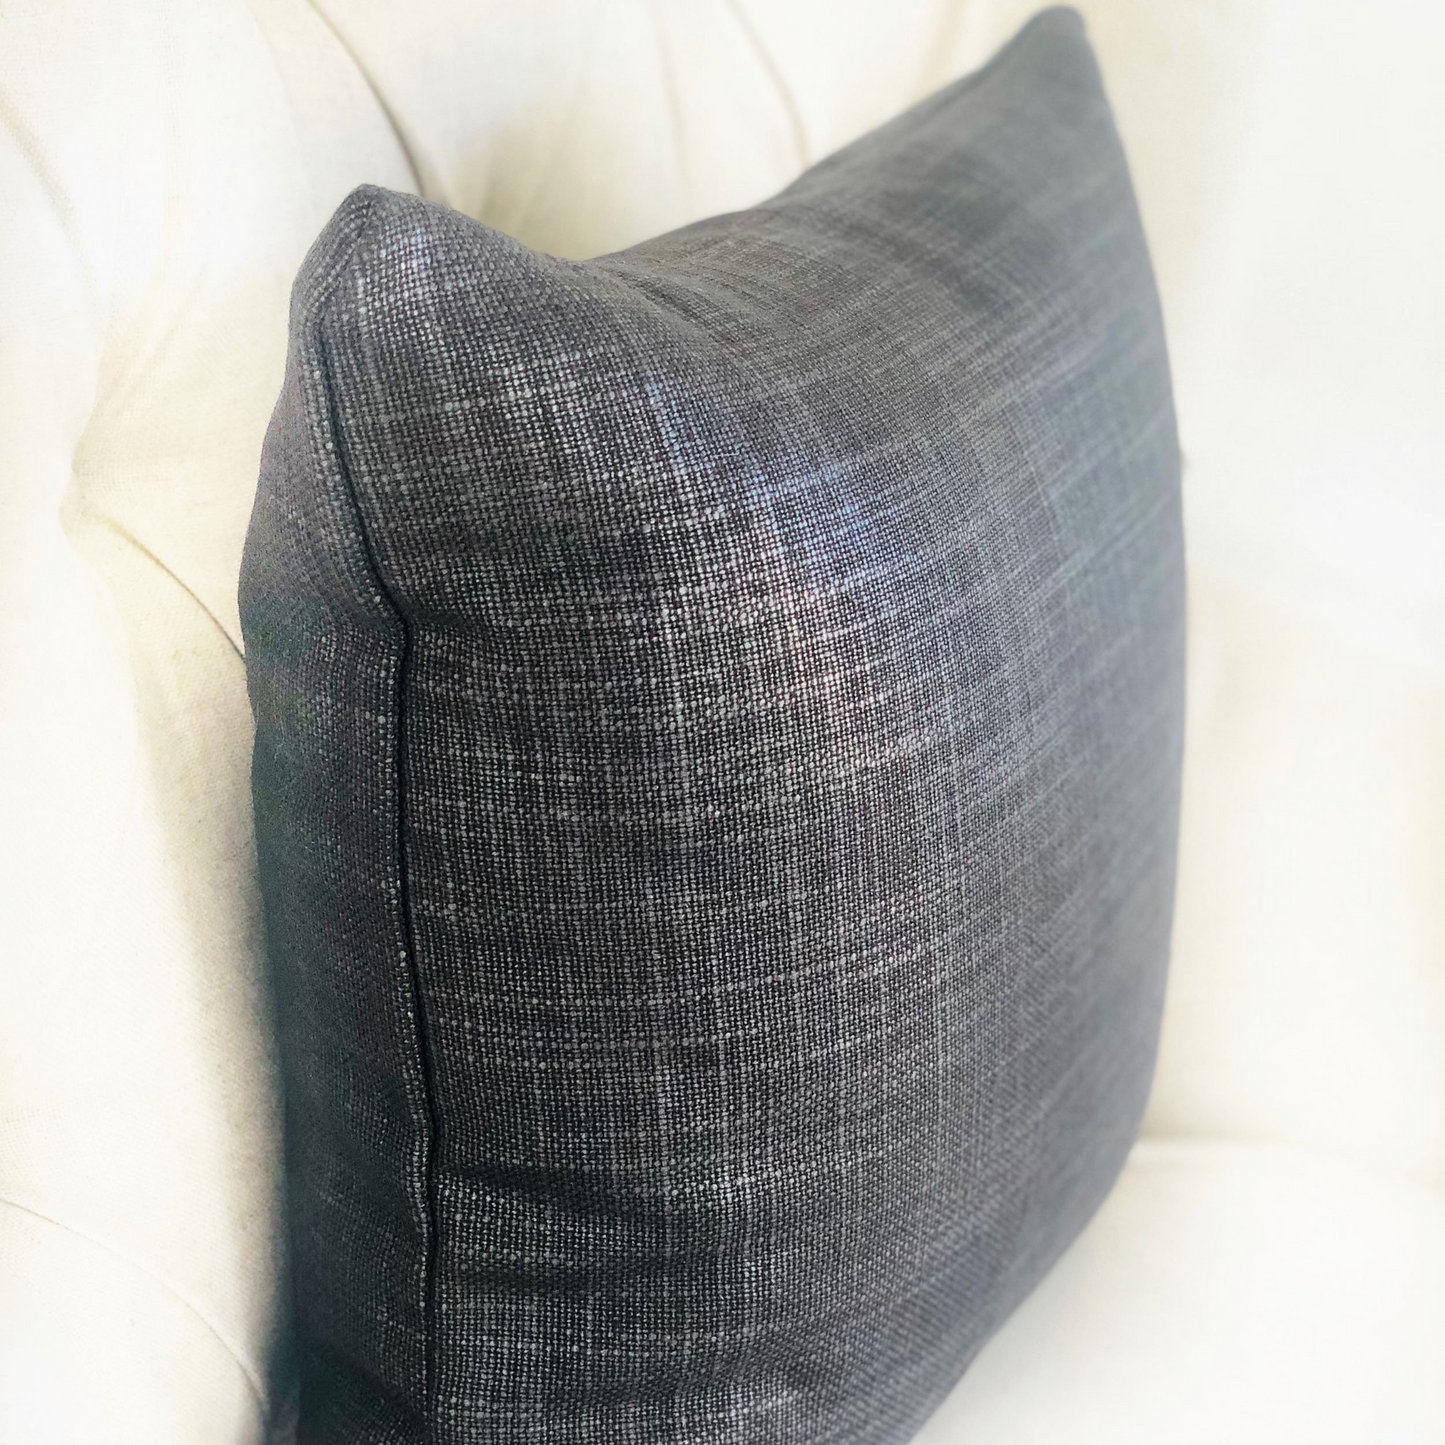 Ashland Glazed Gray Handmade Luxury Pillow - Add Color and Style to Your Space